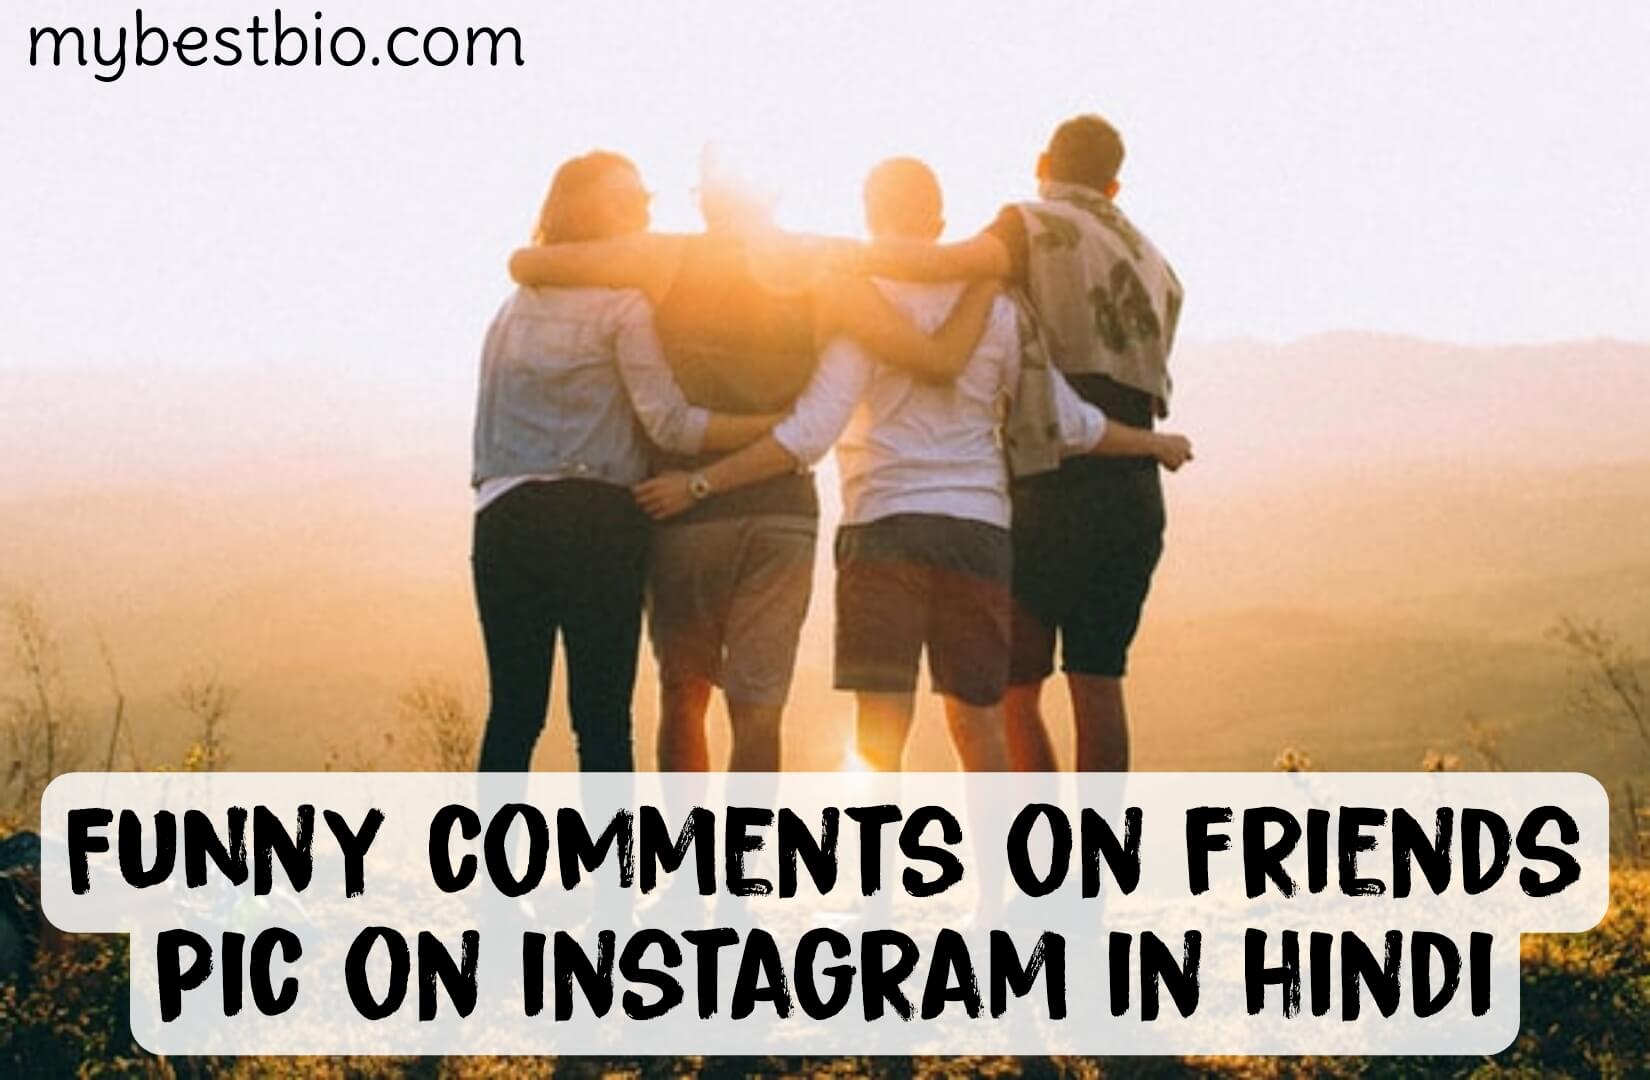 Funny comments on friends pic on instagram in hindi